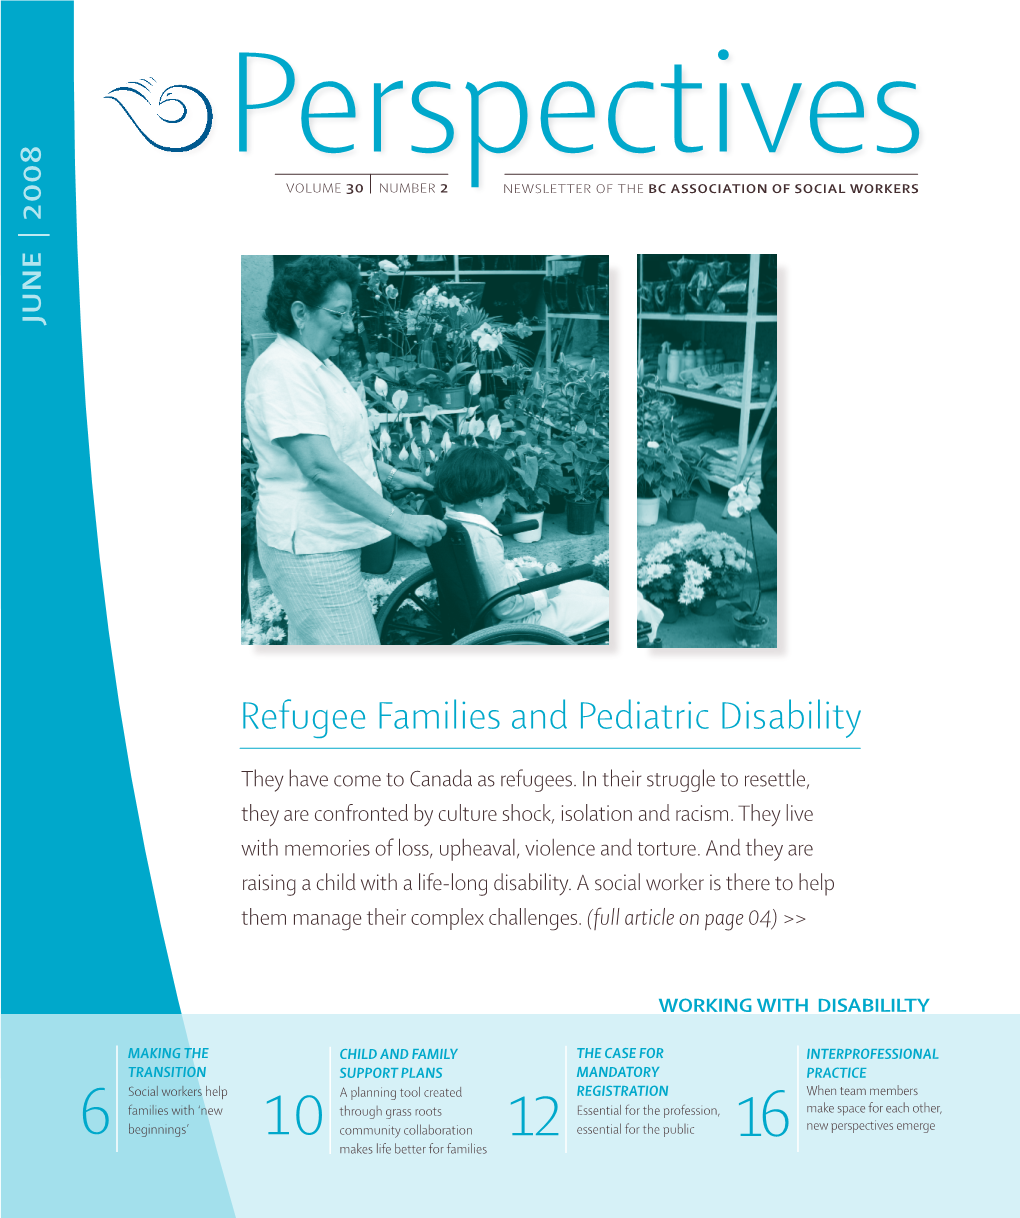 Refugee Families and Pediatric Disability